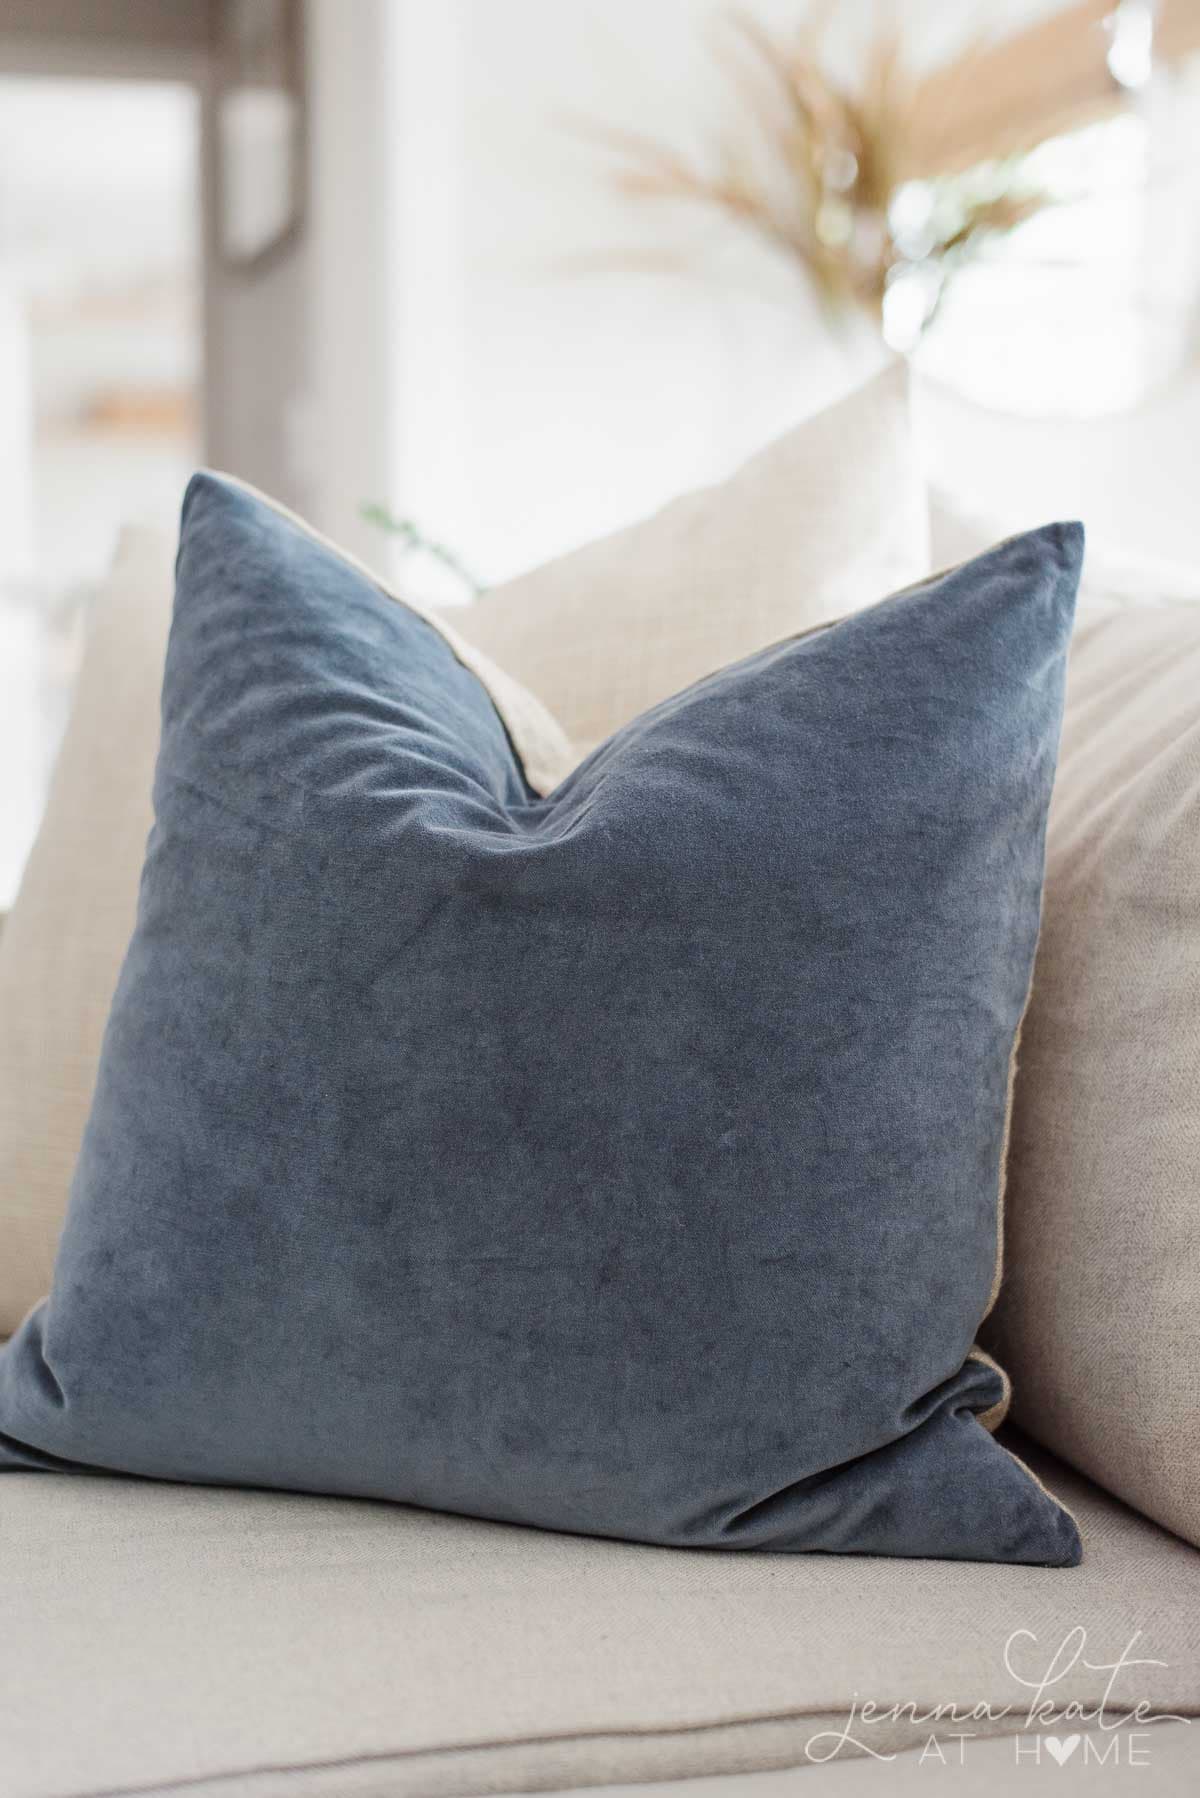 Buy throw pillow covers with the inserts because they are easy to store